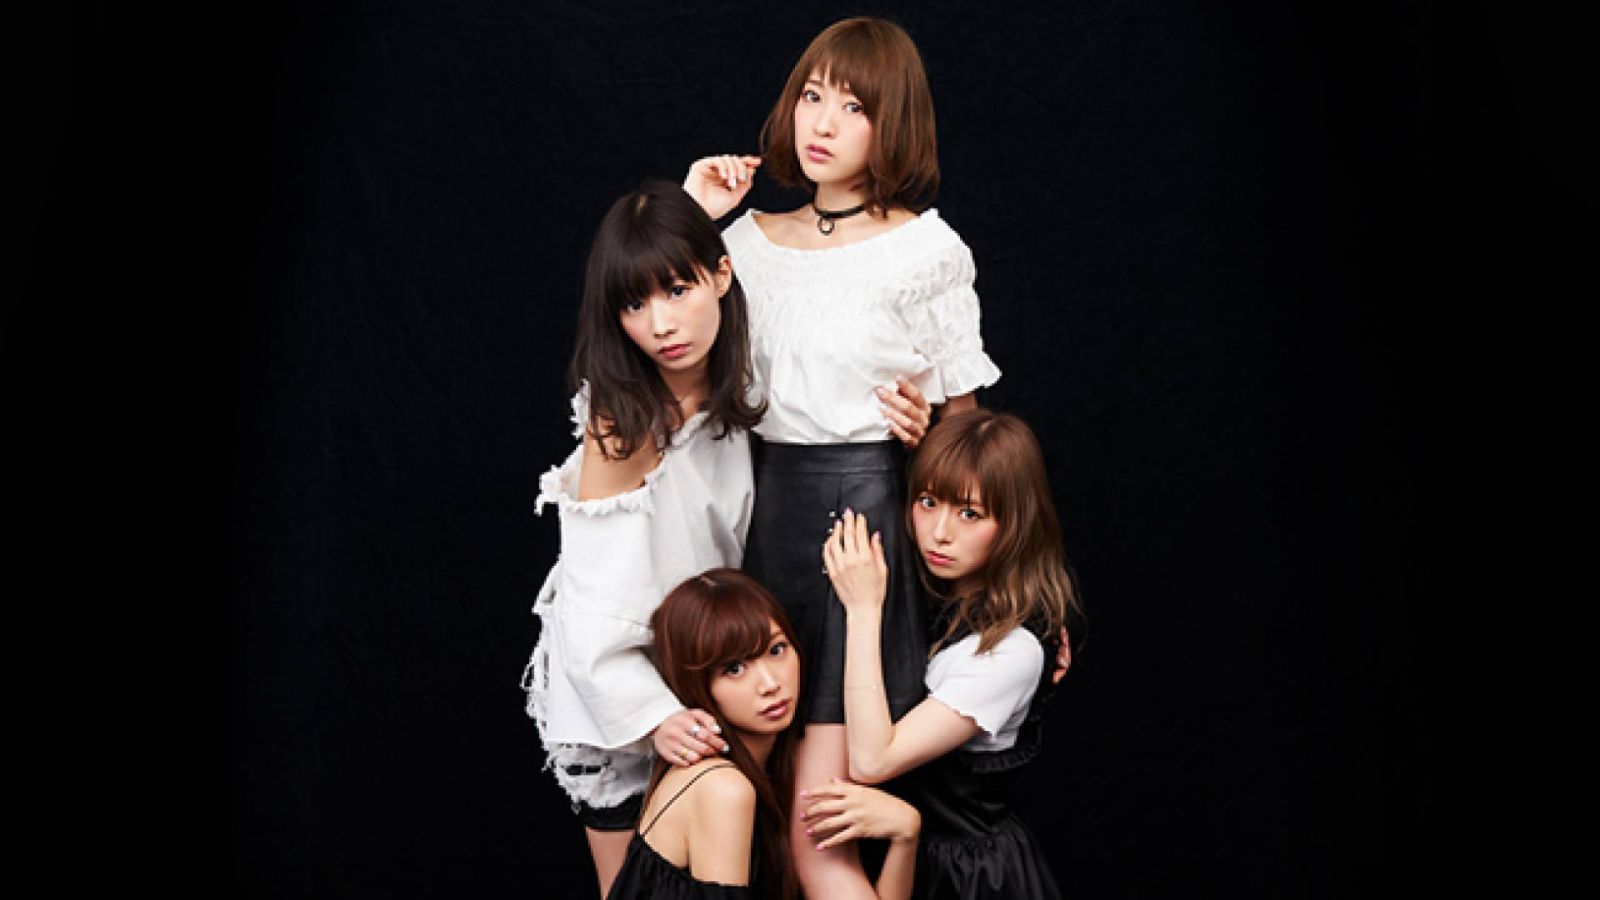 New Releases from Silent Siren © Silent Siren. All Rights Reserved.